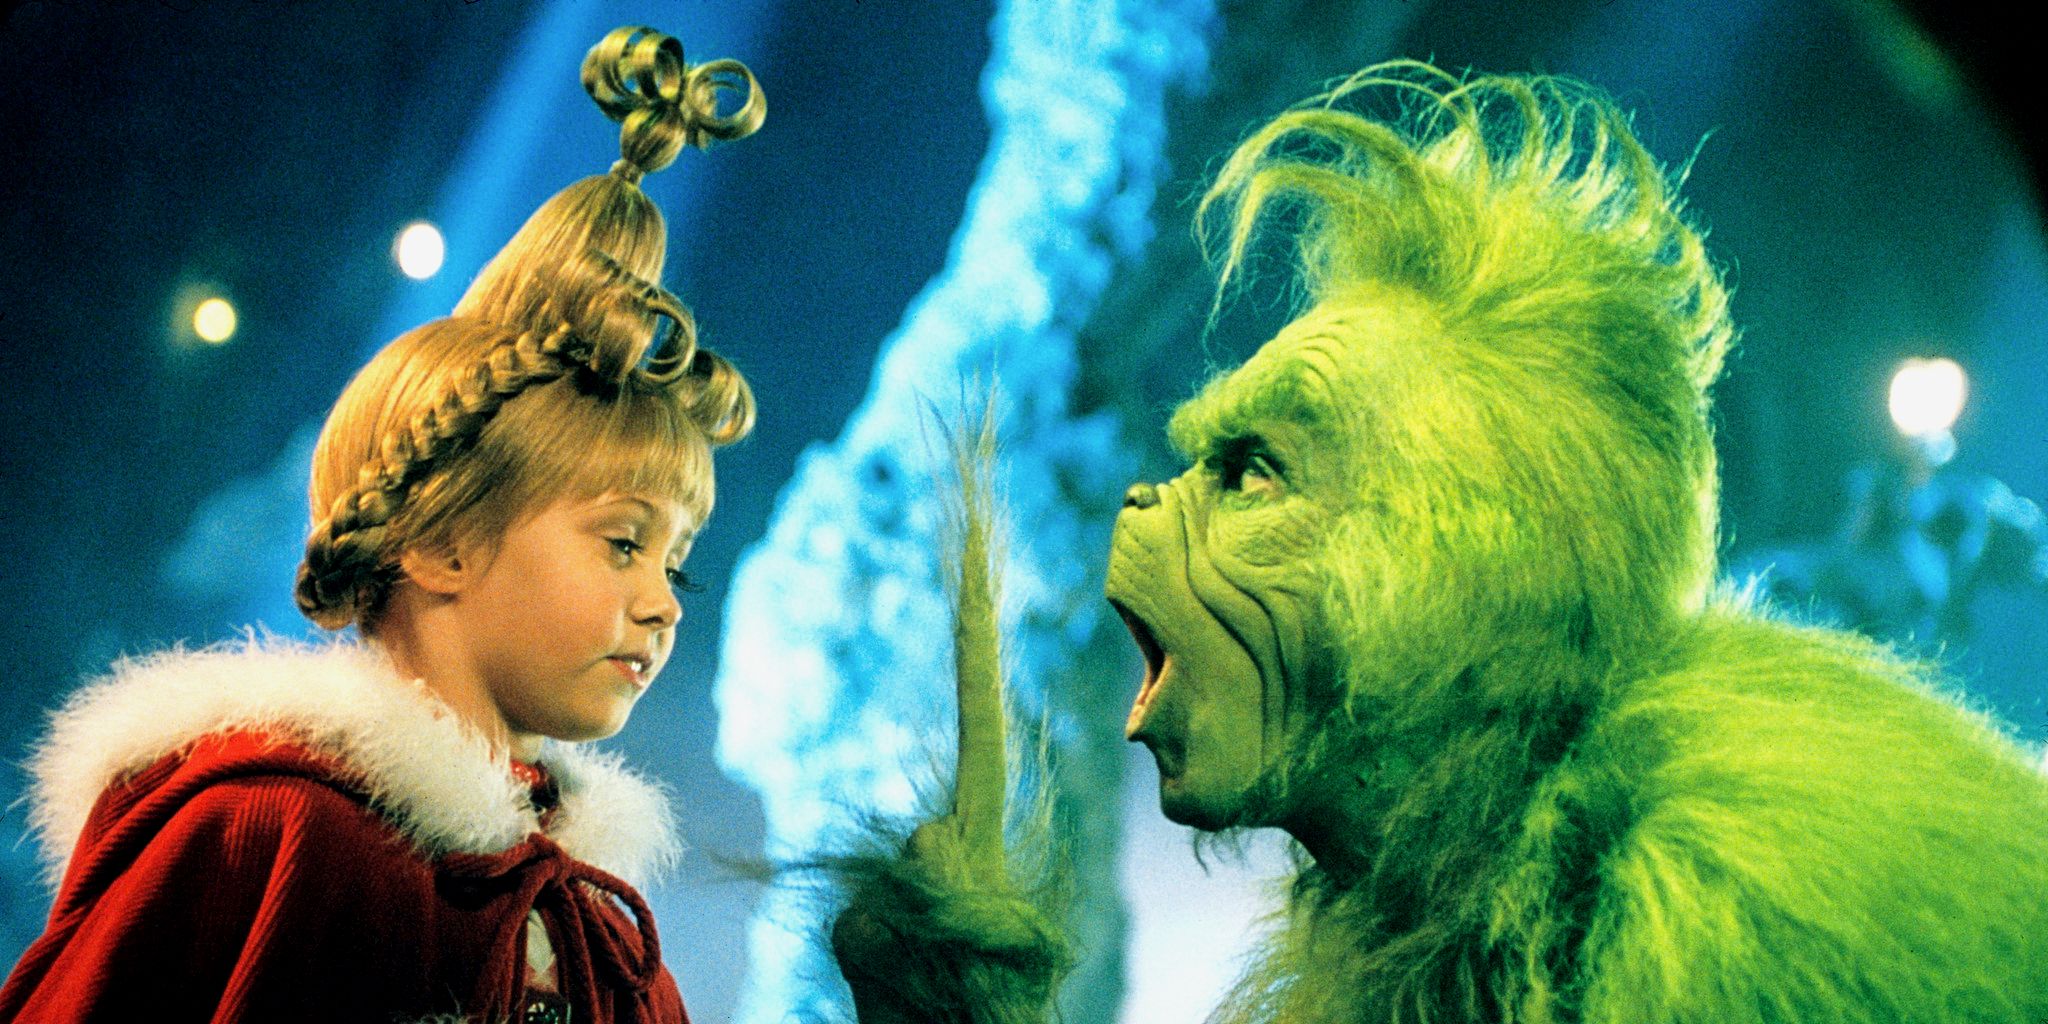 The Grinch and Cindy Lou Who face to face